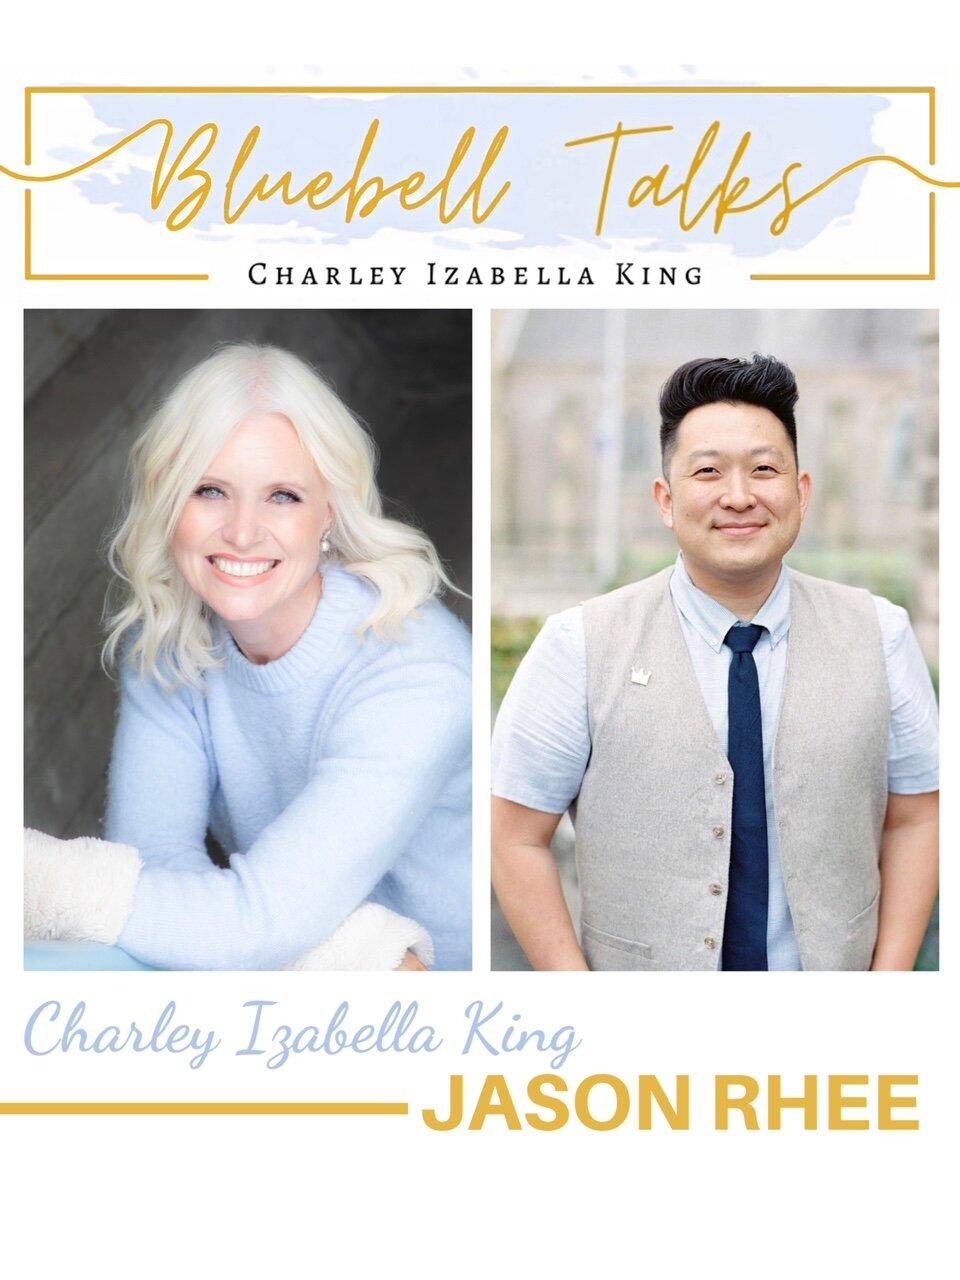 Jason Rhee is a Los Angeles based Wedding Planner and Designer, as well as a Youtube Star. His personality is completly infectious and you'll experience in his interview with Charley. 